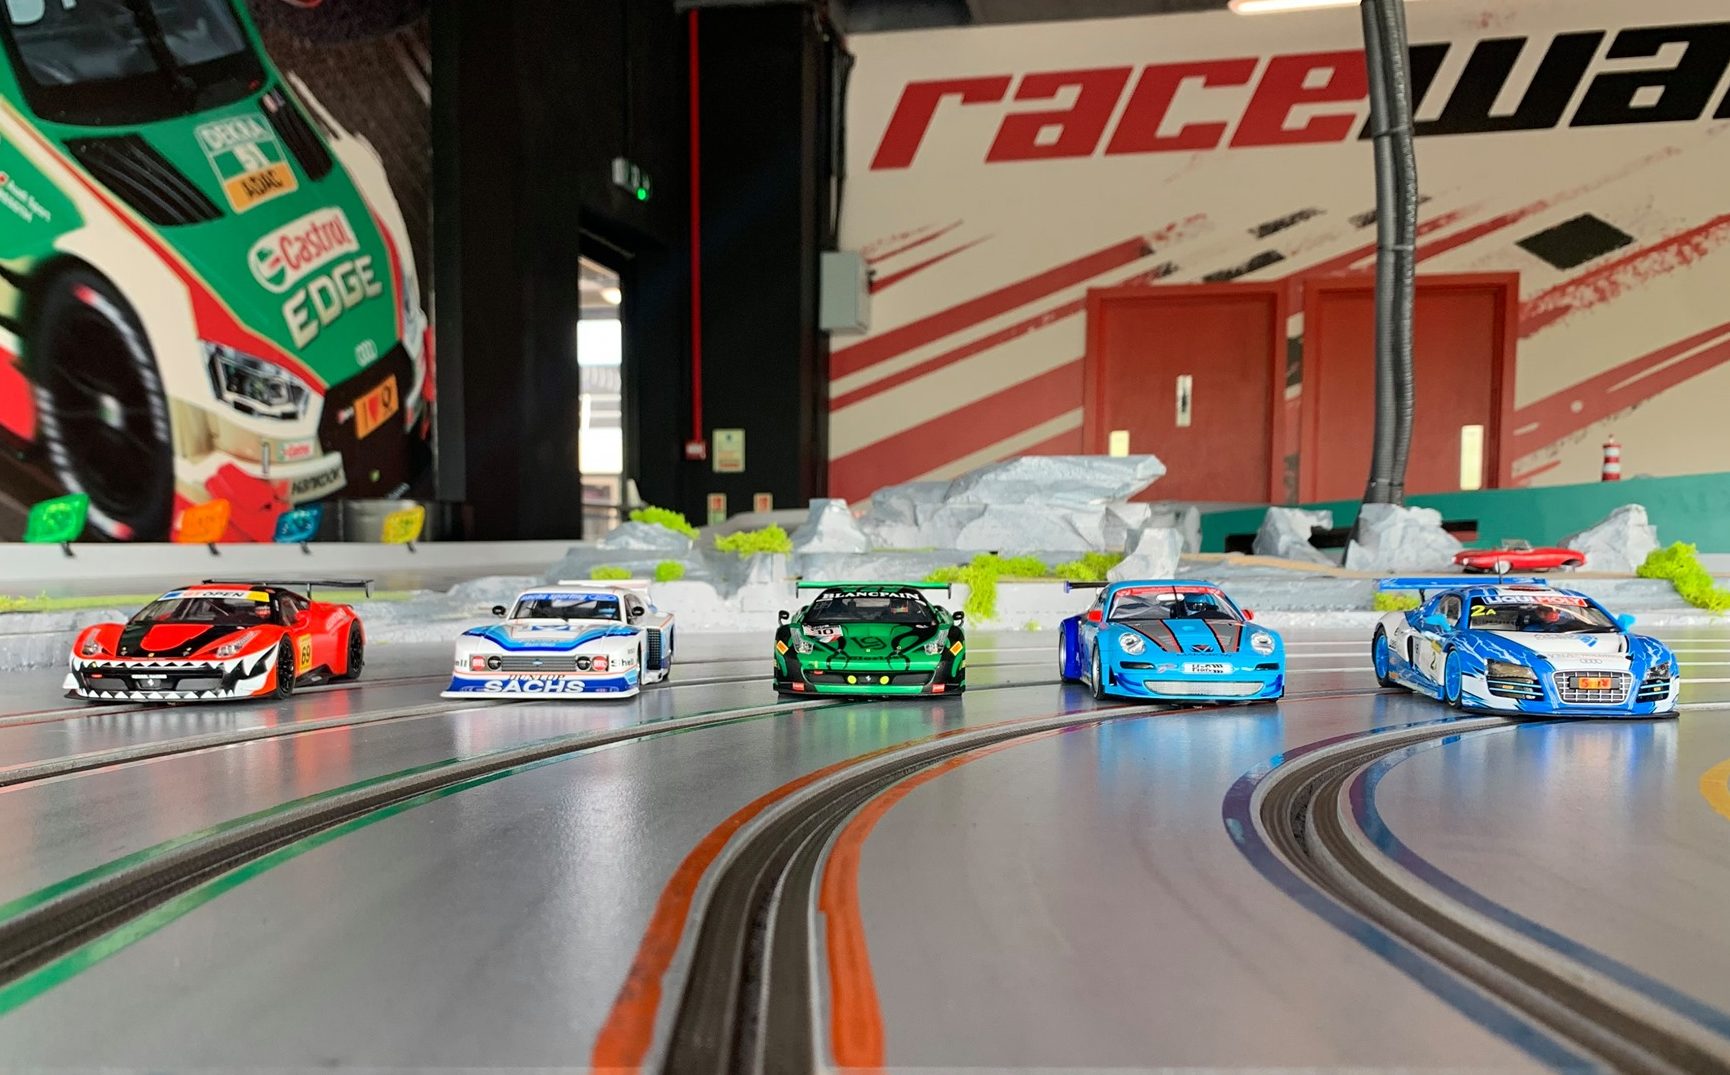 Groove rider: Slot car racing is back